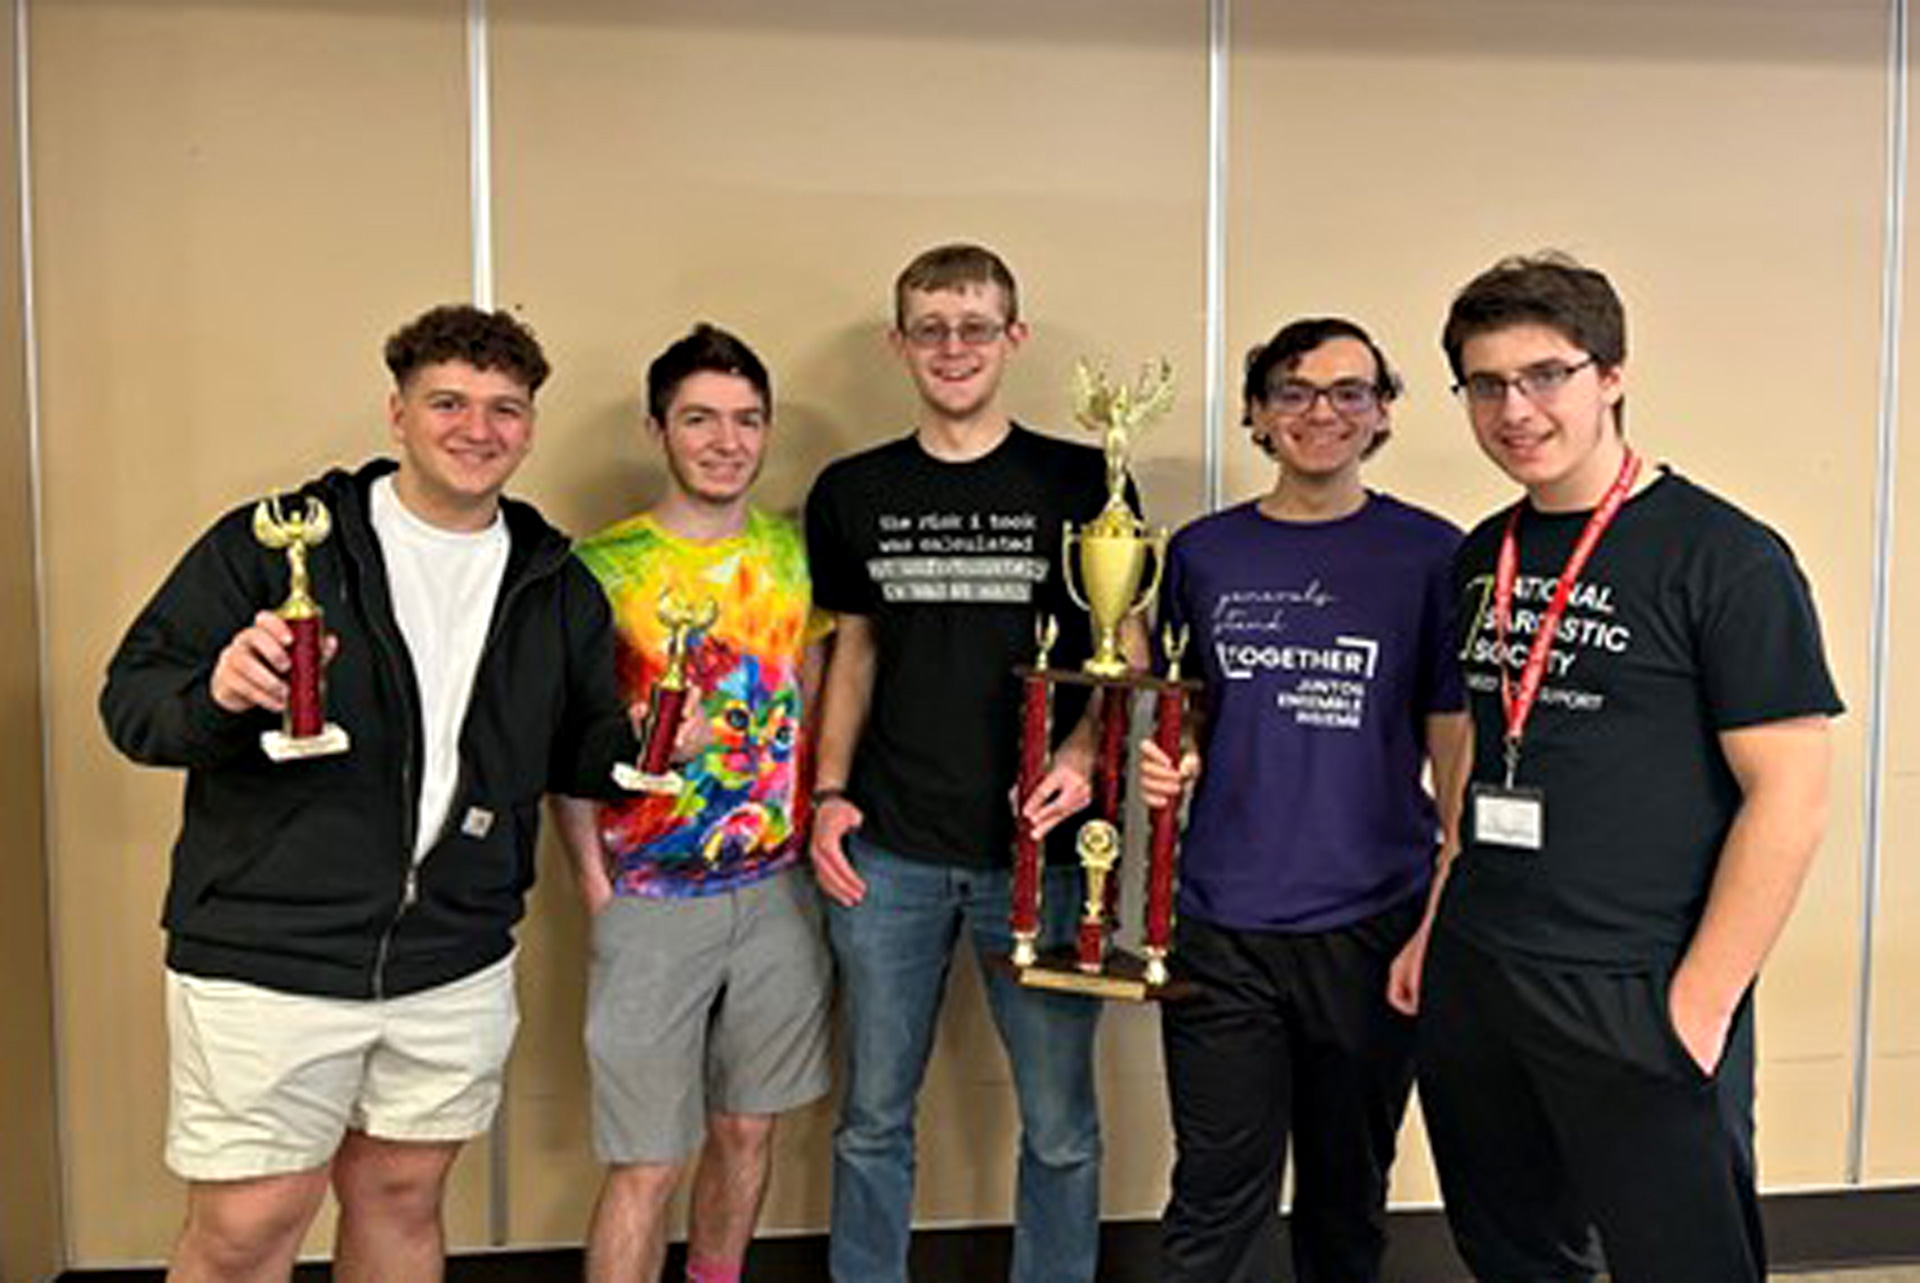 AP Physics students, led by seniors Drew Atkins, Benjamin Campbell, Torben DeGus, Jake Tripi, and Matthew Wlazlo recently competed in the annual Long Island Physics Olympics.